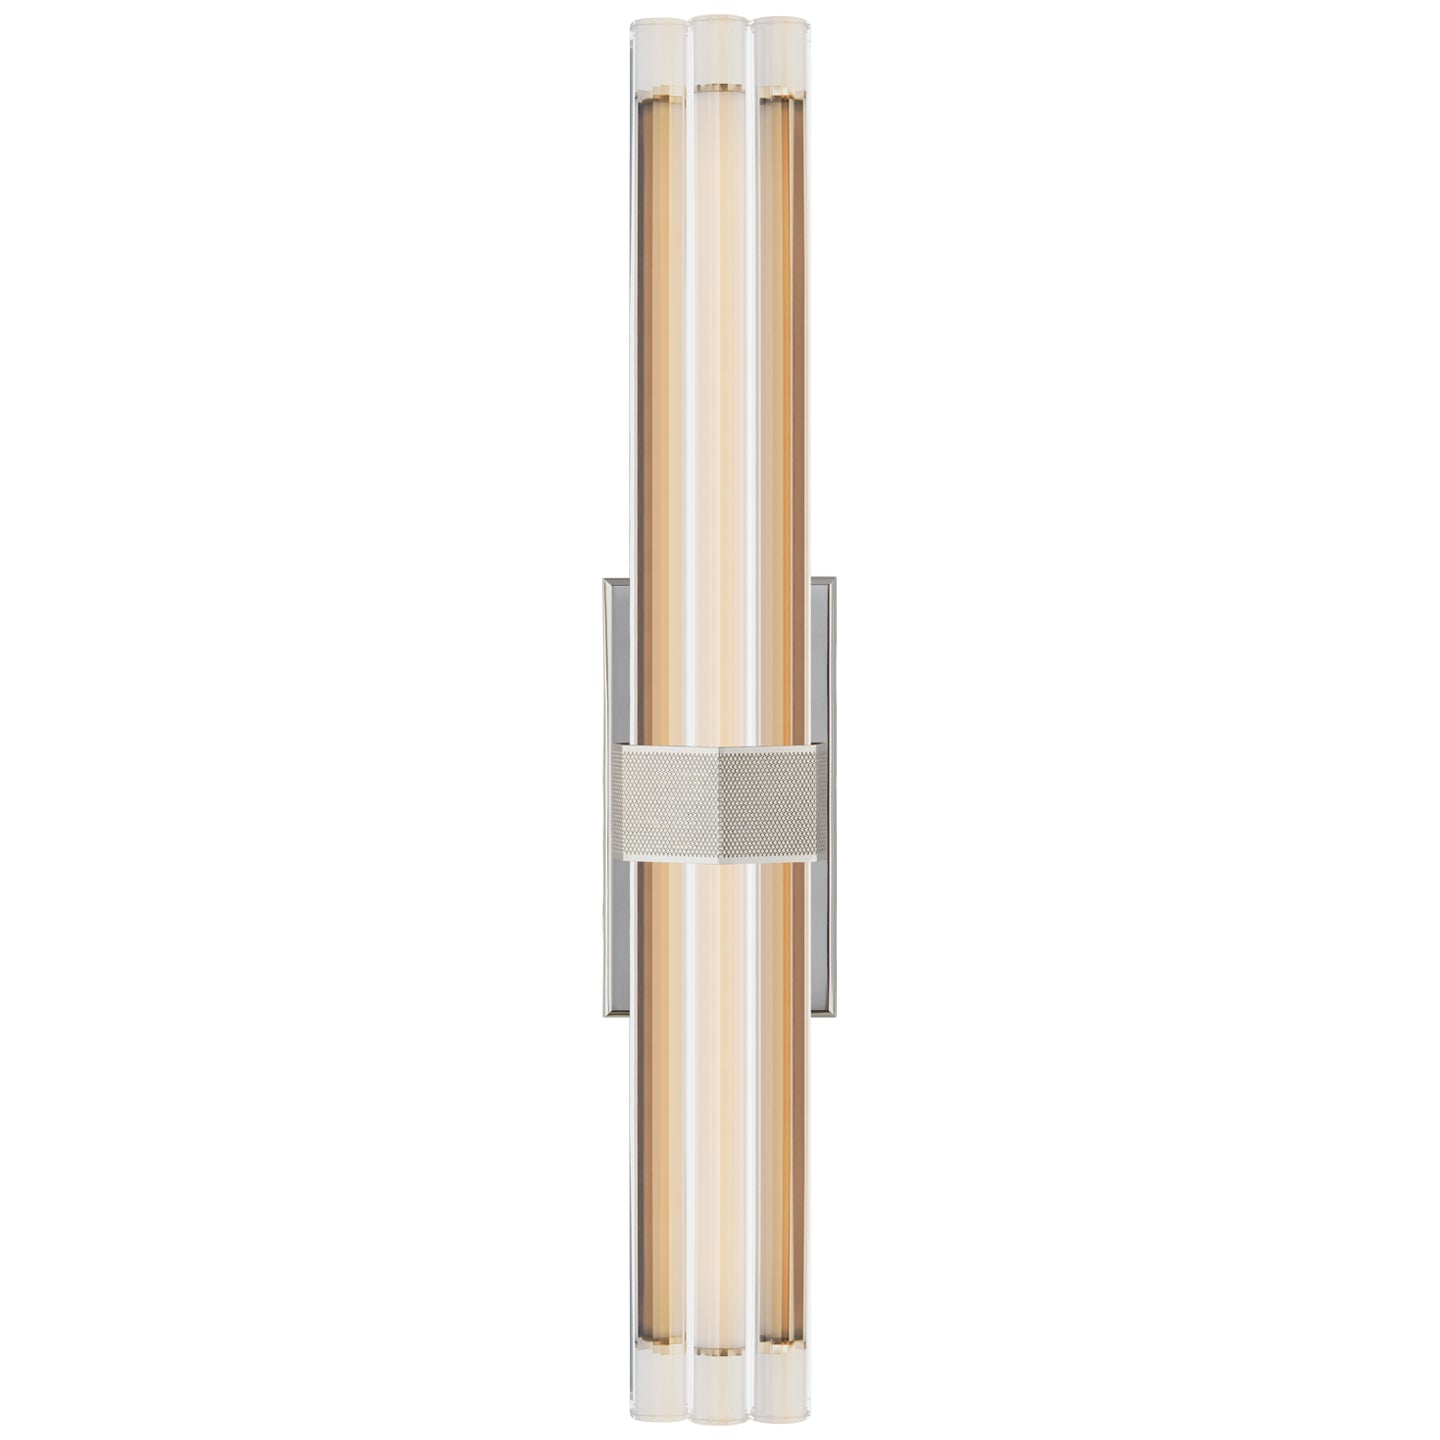 Load image into Gallery viewer, Visual Comfort Signature - LR 2910PN-CG - LED Wall Sconce - Fascio - Polished Nickel
